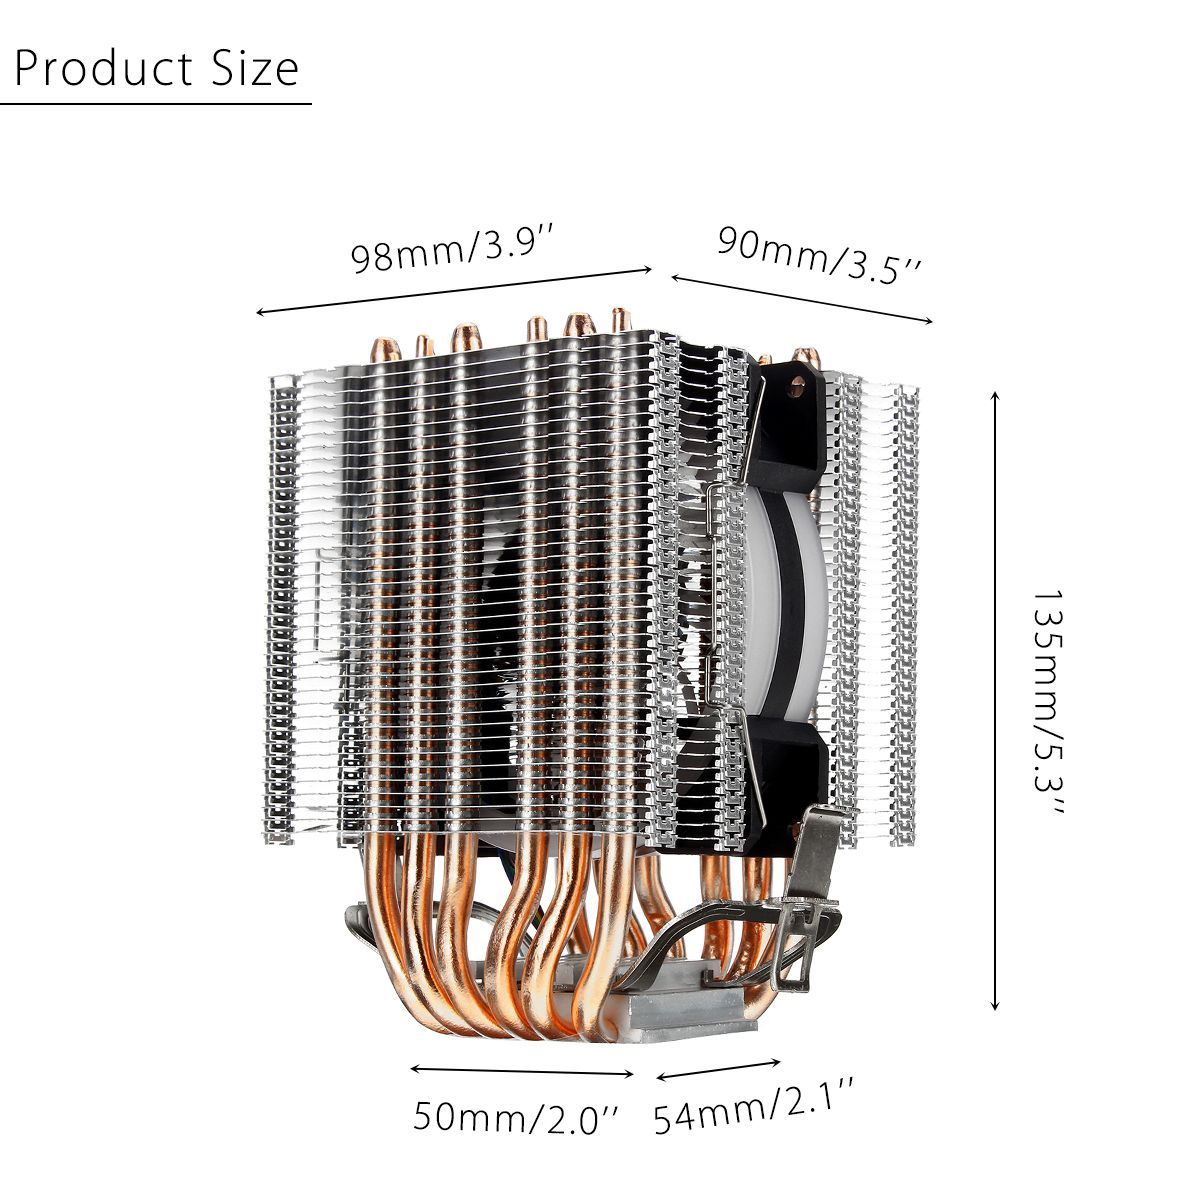 3-Pin-CPU-Cooler-Cooling-Fan-Heatsink-for-Intel-77511501151115511561366-and-AMD-All-Platforms-5-Colo-1426592